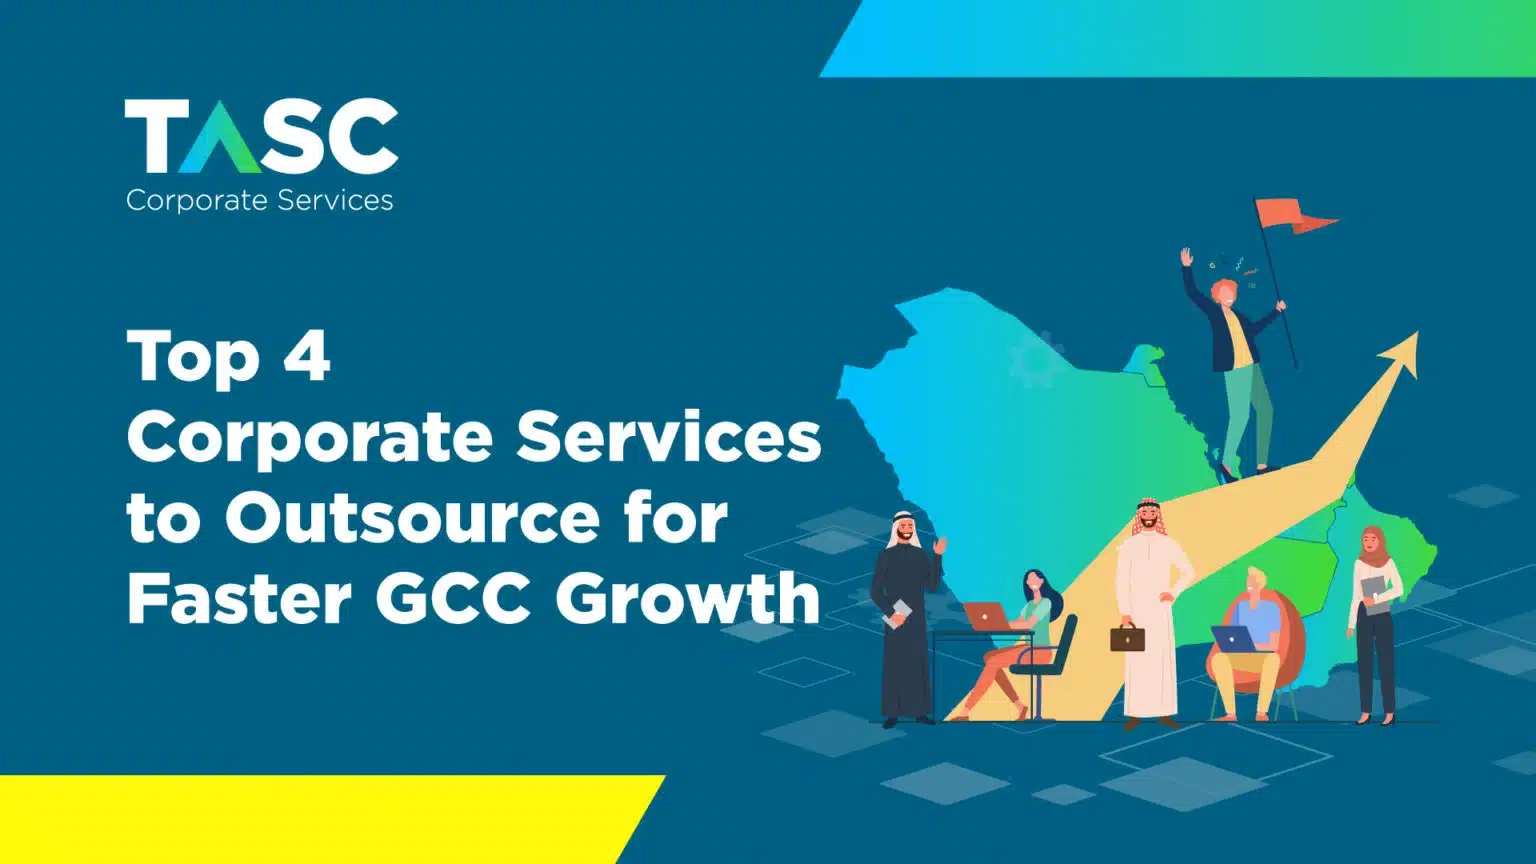 Top 4 Corporate Services to Outsource For Faster GCC Growth